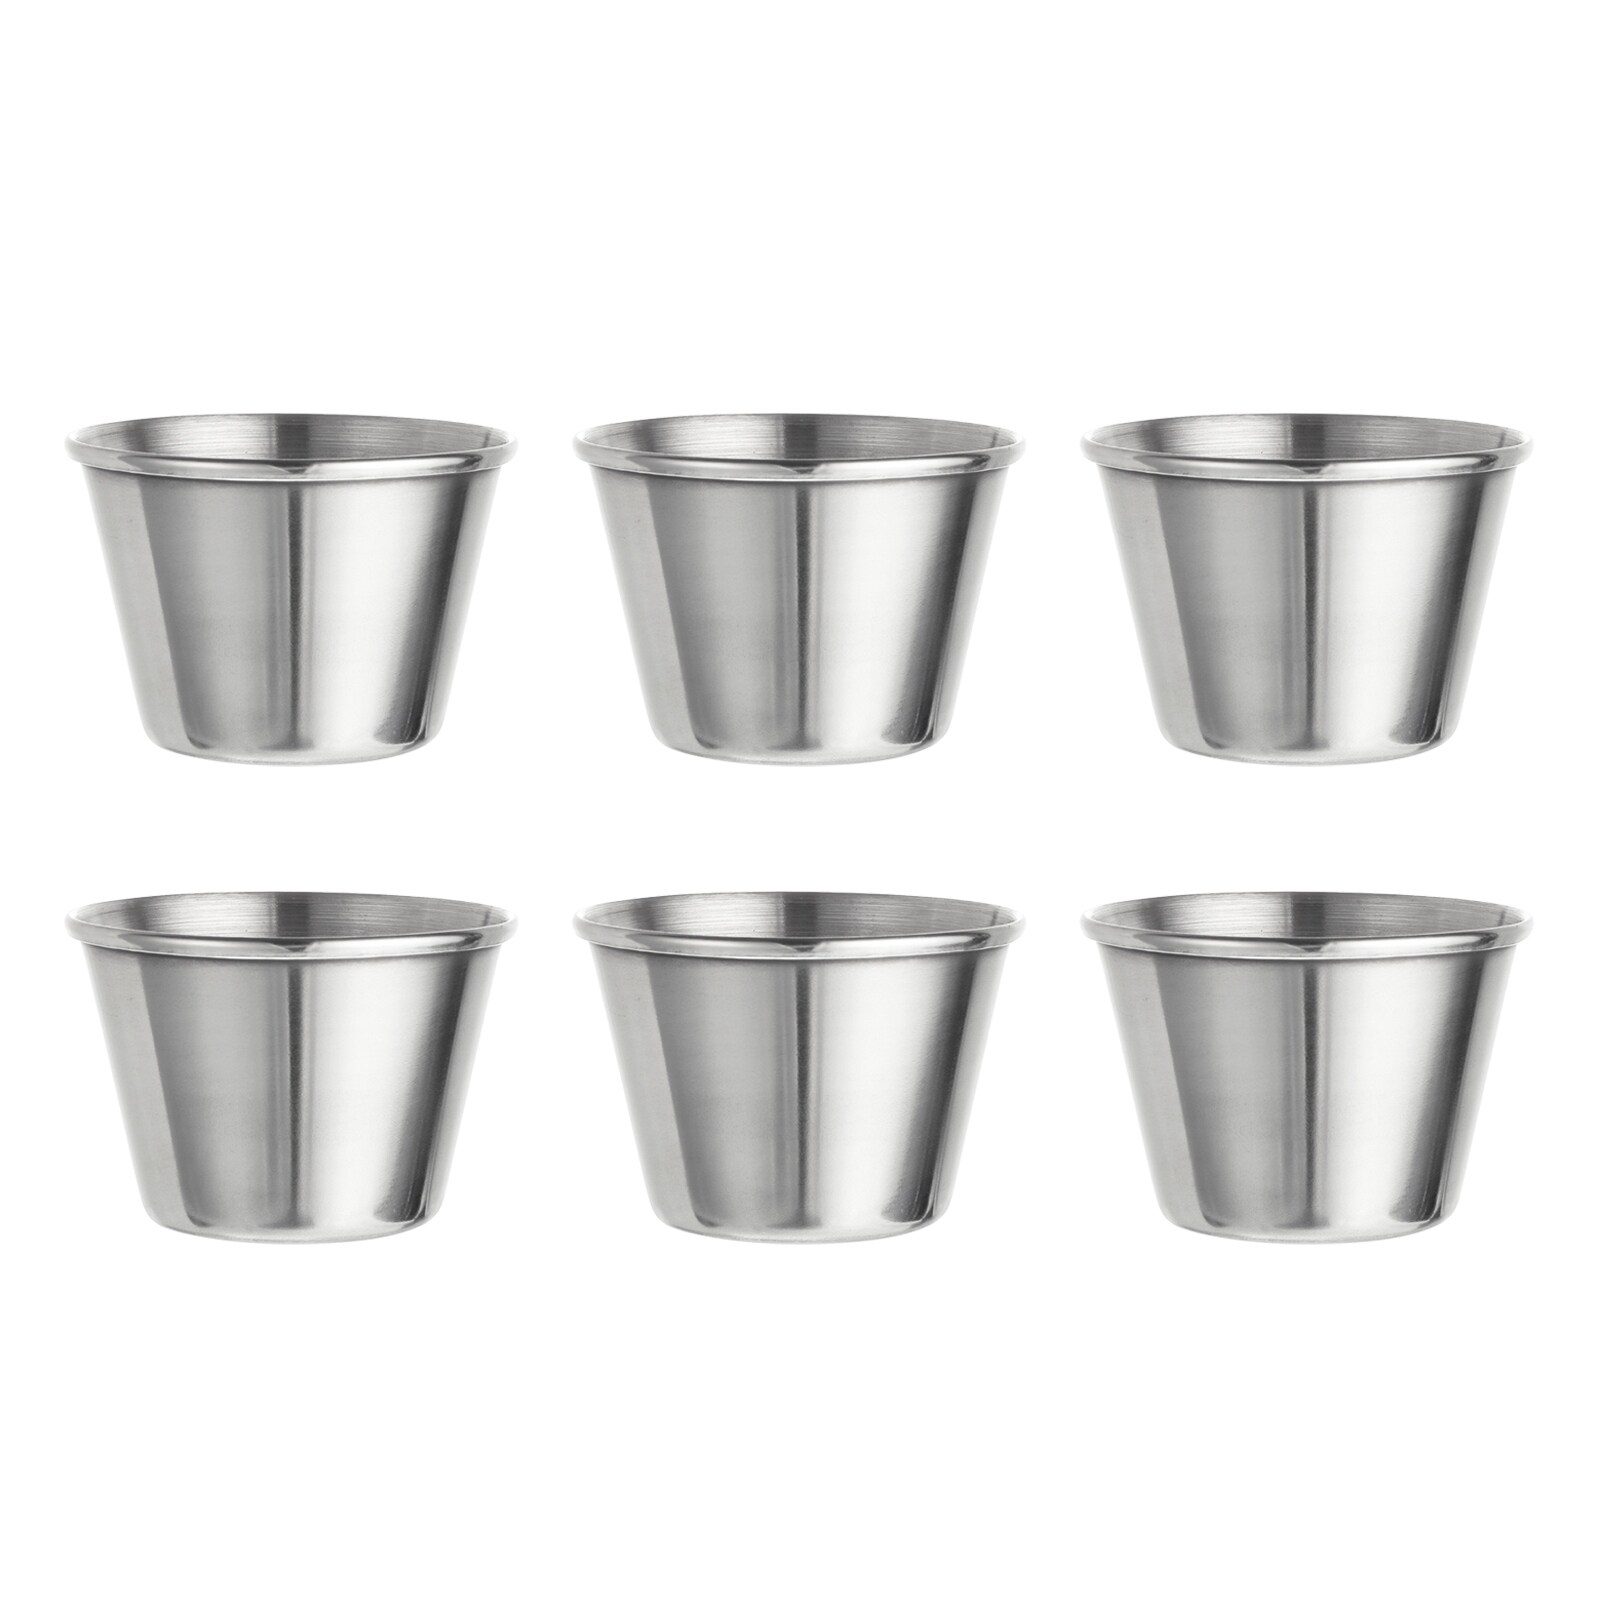 https://ak1.ostkcdn.com/images/products/is/images/direct/ce22d90ac002992f2ee57400a1304f95873a29ad/Stainless-Steel-Shot-Glasses%2C-6pcs-70ml-2.5-OZ-Clear-for-Bar-Restaurants-Home.jpg